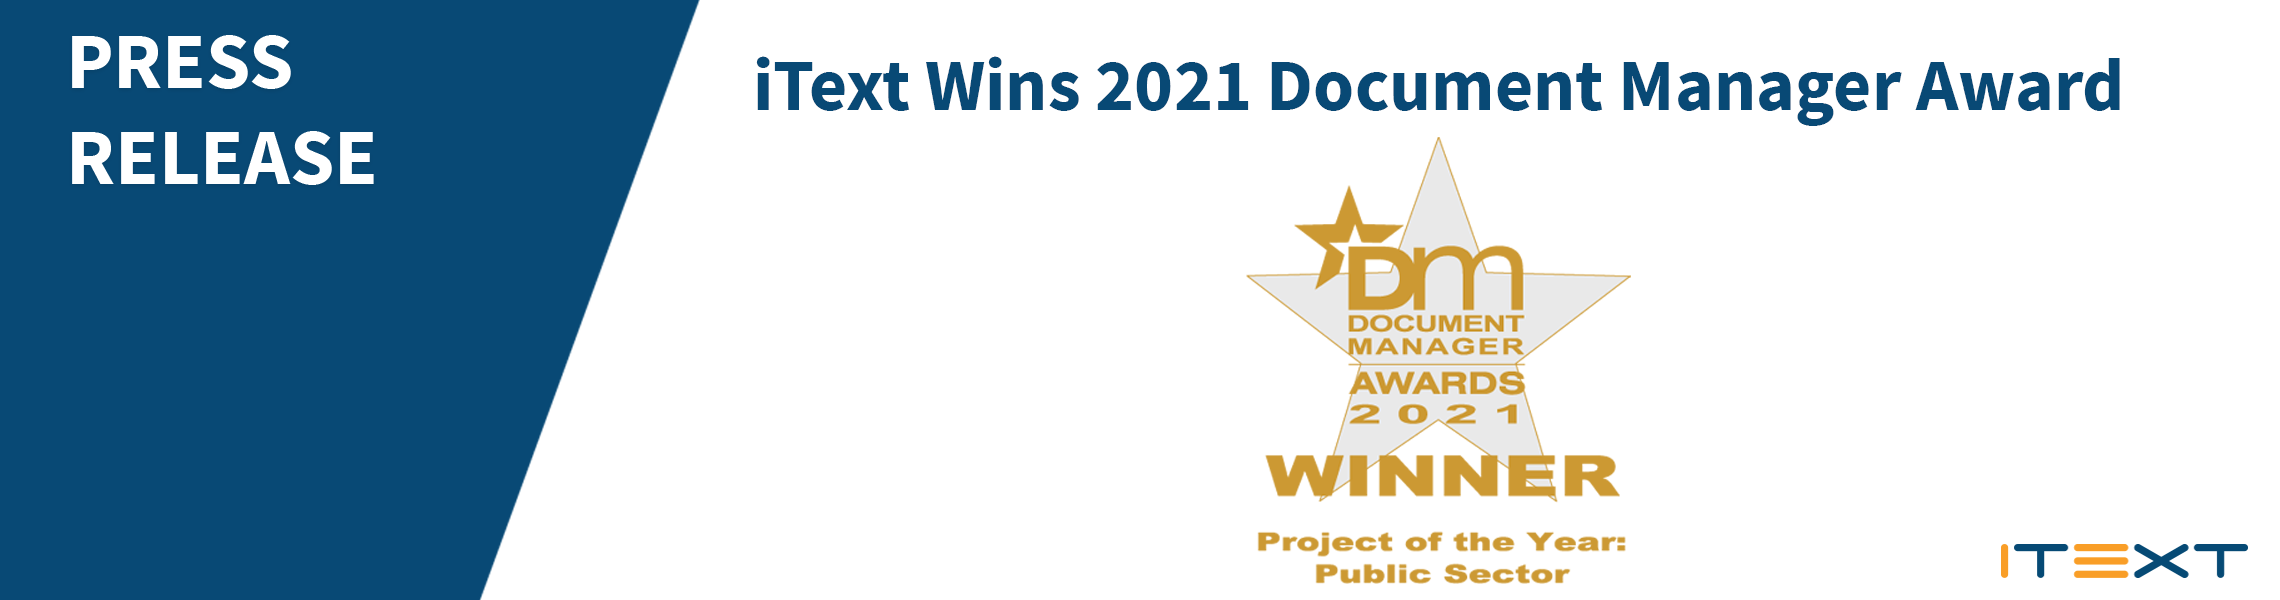 document manager awards